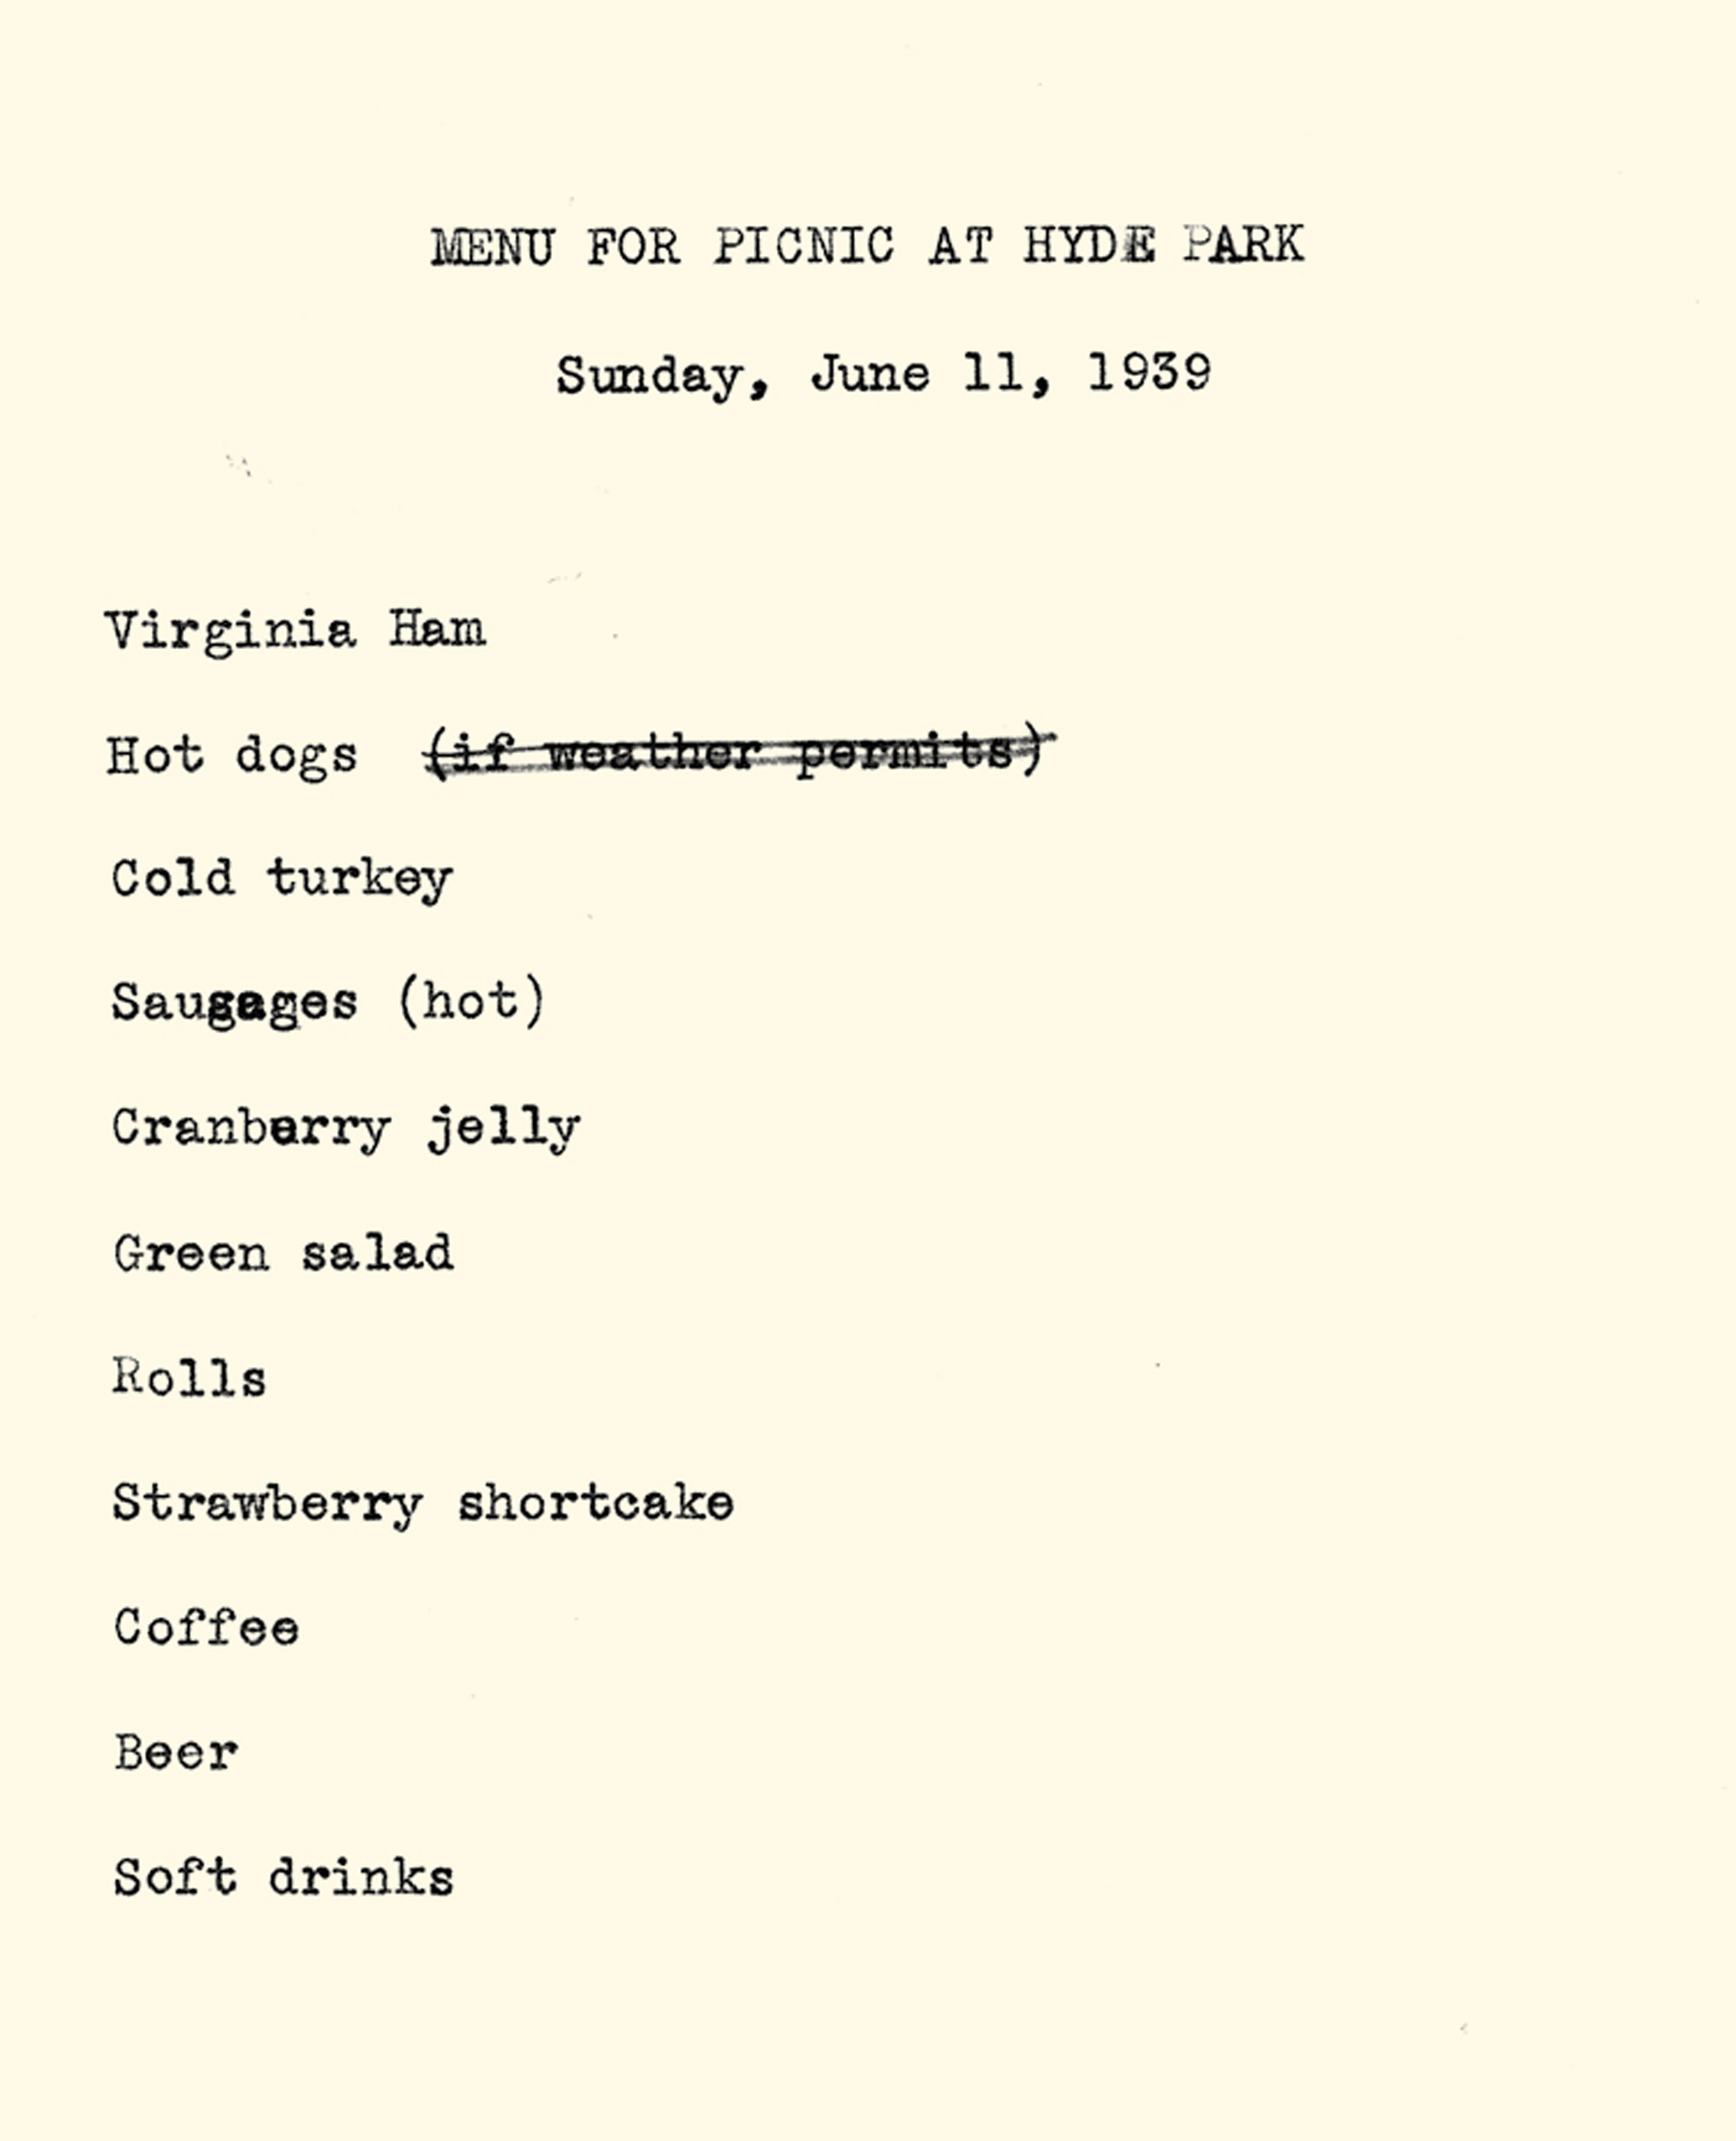 The typewritten “hot dog” menu, dated Sunday, June 11th, nineteen thirty-nine, devised for a luncheon in honor of King George the sixth’s visit to President Franklin D. Roosevelt’s home at Hyde Park, New York. 